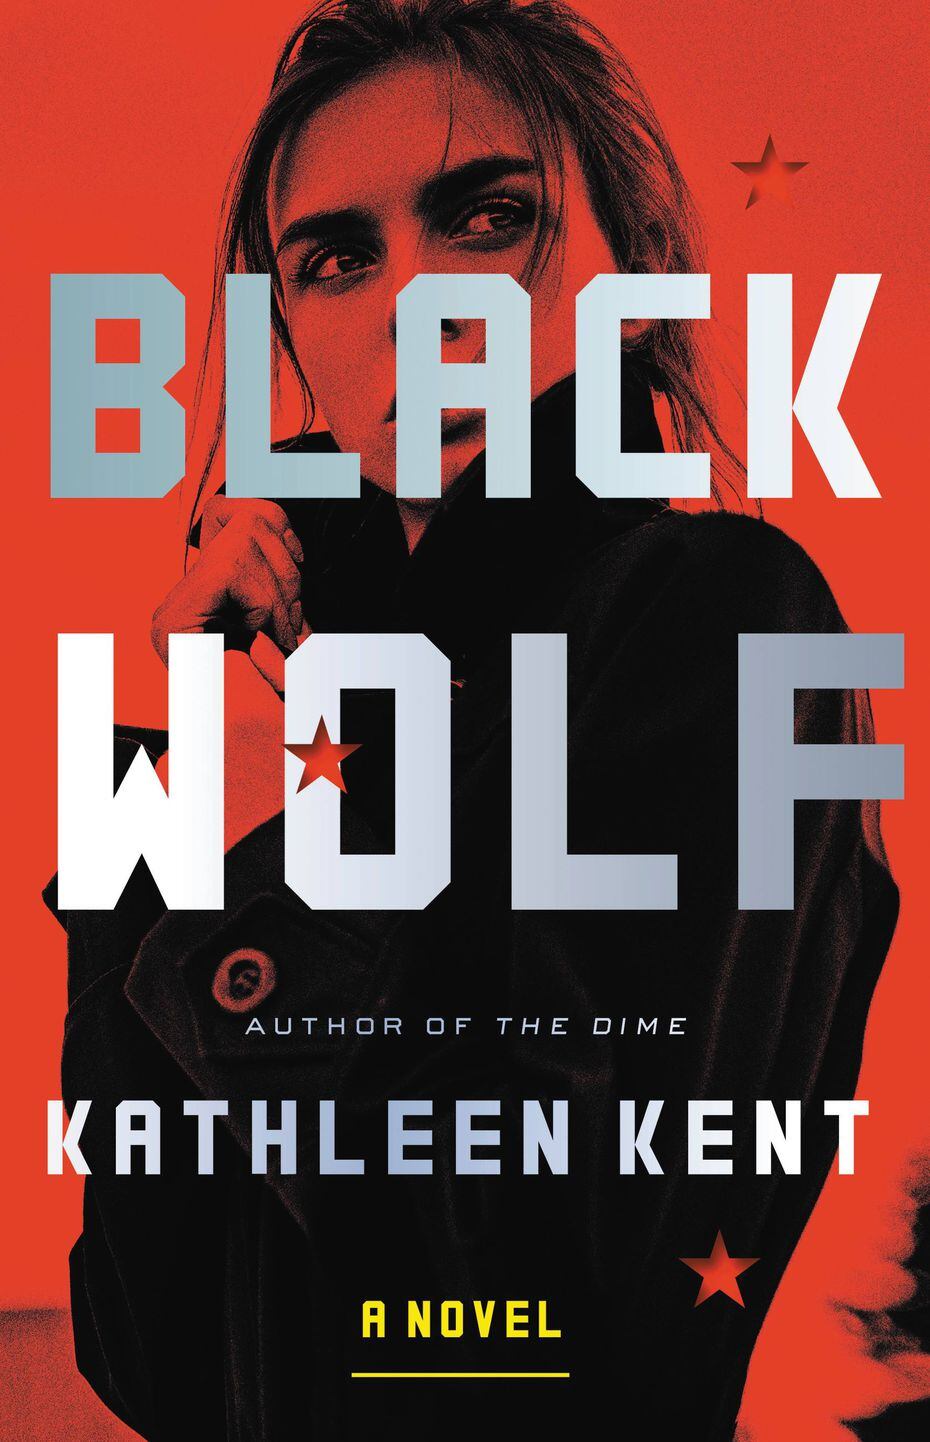 Kathleen Kent's "Black Wolf" is a thriller about a CIA agent who is a super recognizer,...